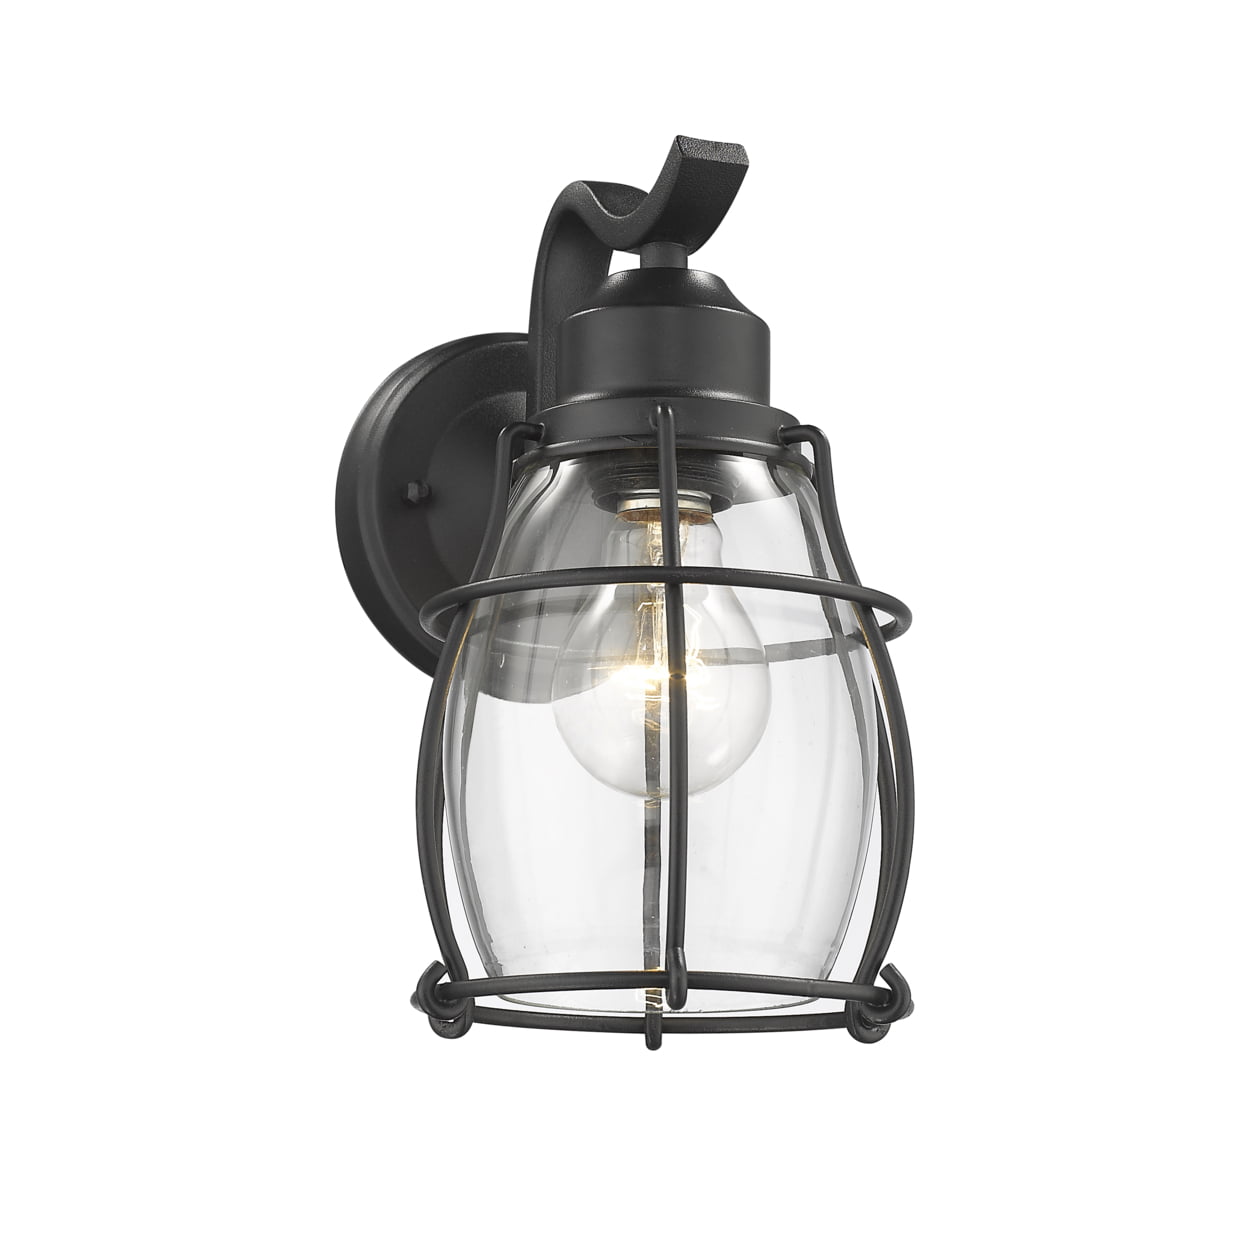 Picture of Chloe Lighting CH2D291BK10-OD1 Charlotte Industrial 1 Light Textured Black Outdoor Wall Sconce - 10 in.